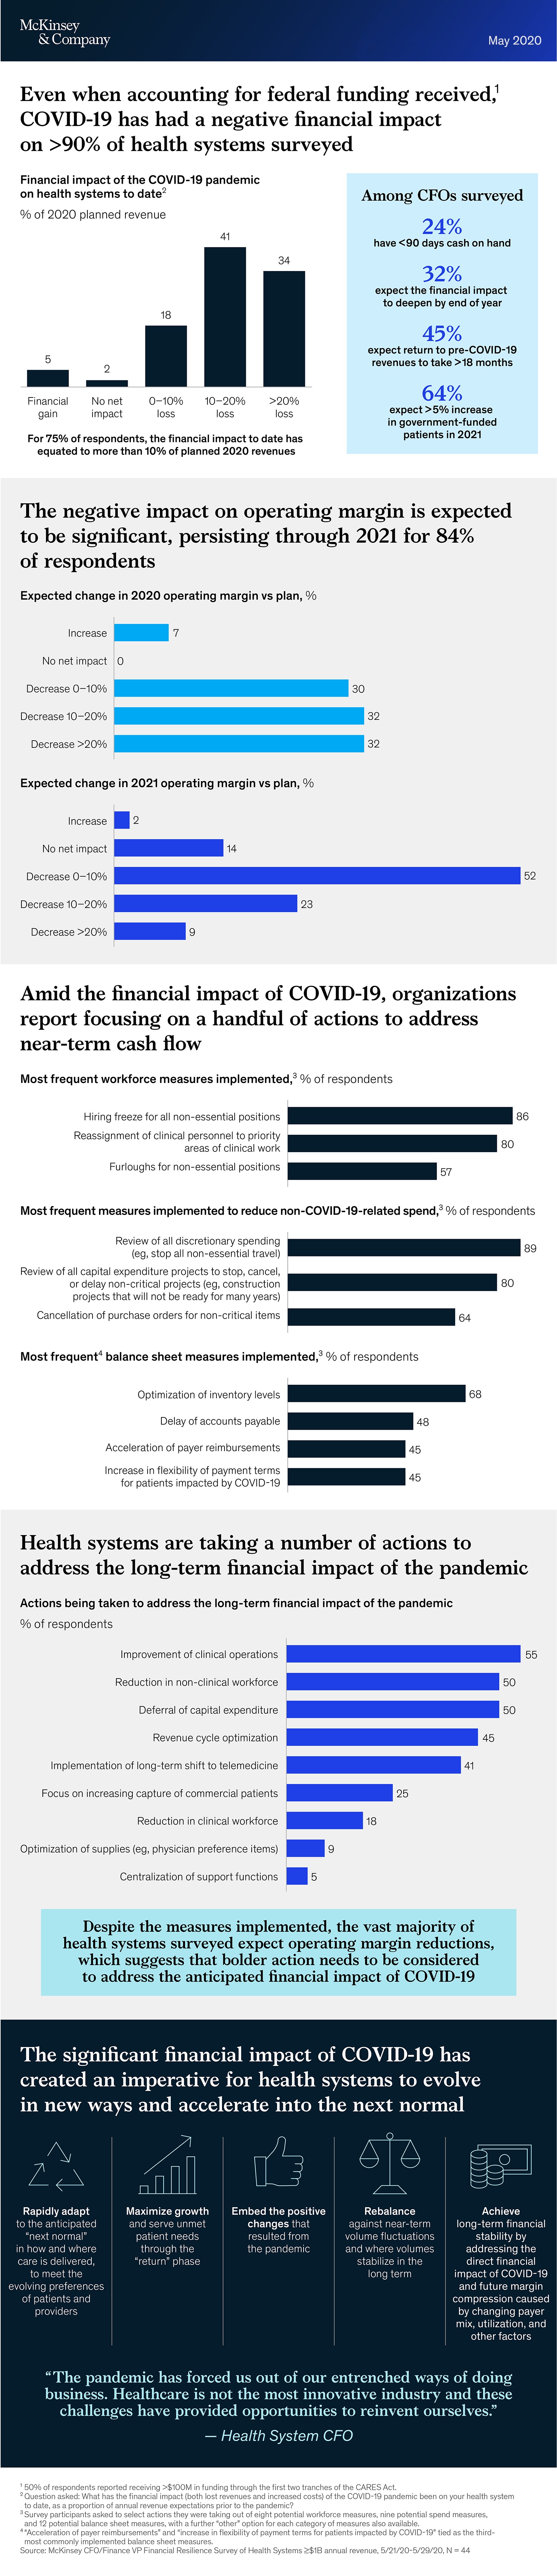 COVID-19 has a negative financial impact on 90% of health systems surveyd